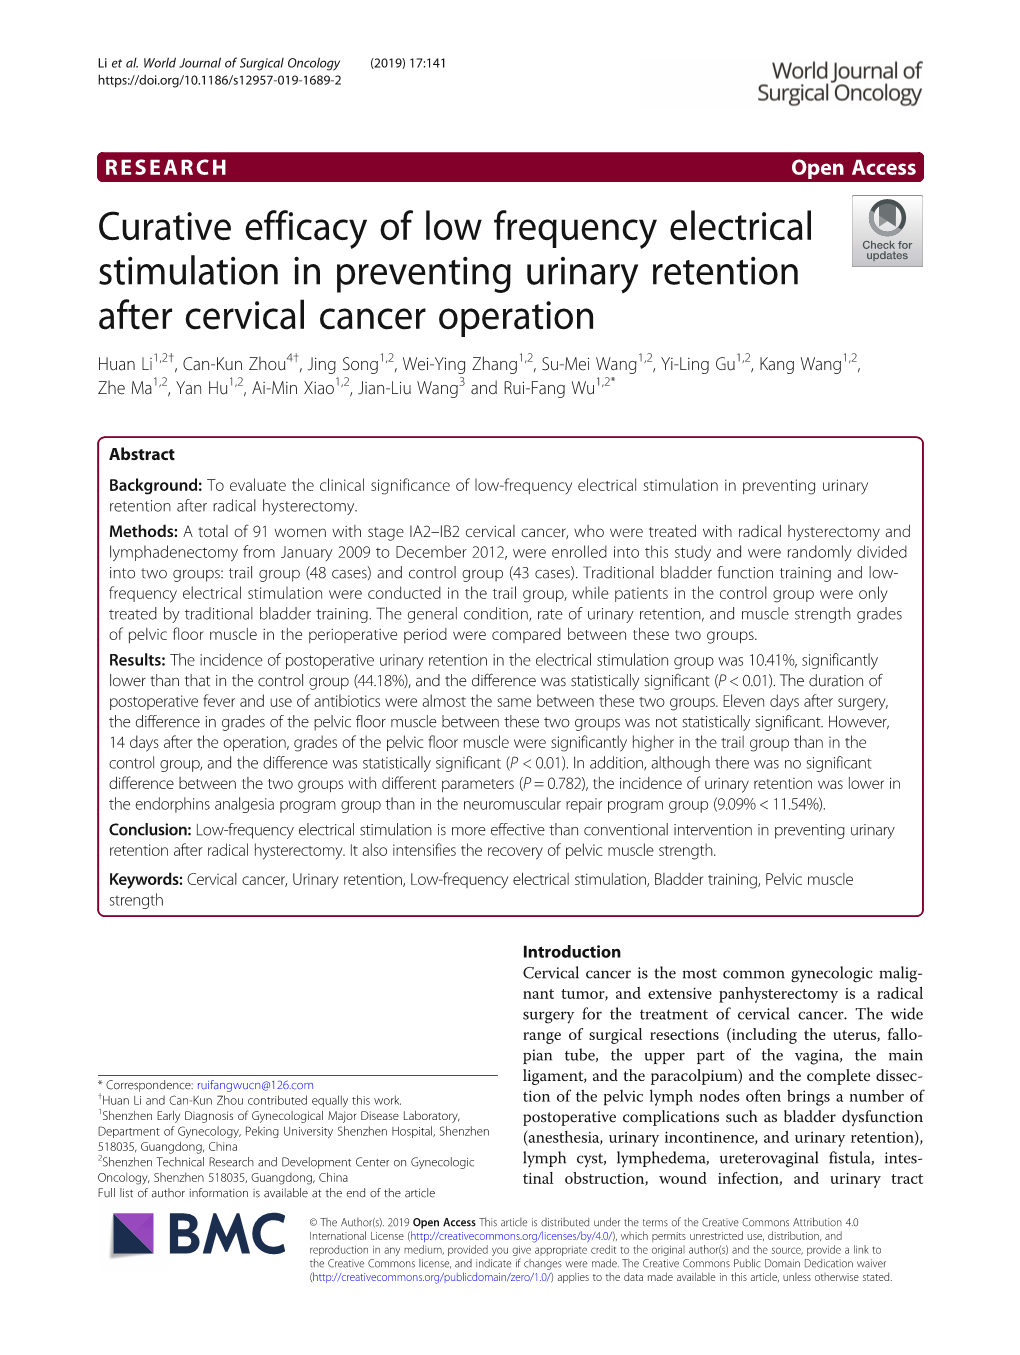 Curative Efficacy of Low Frequency Electrical Stimulation in Preventing